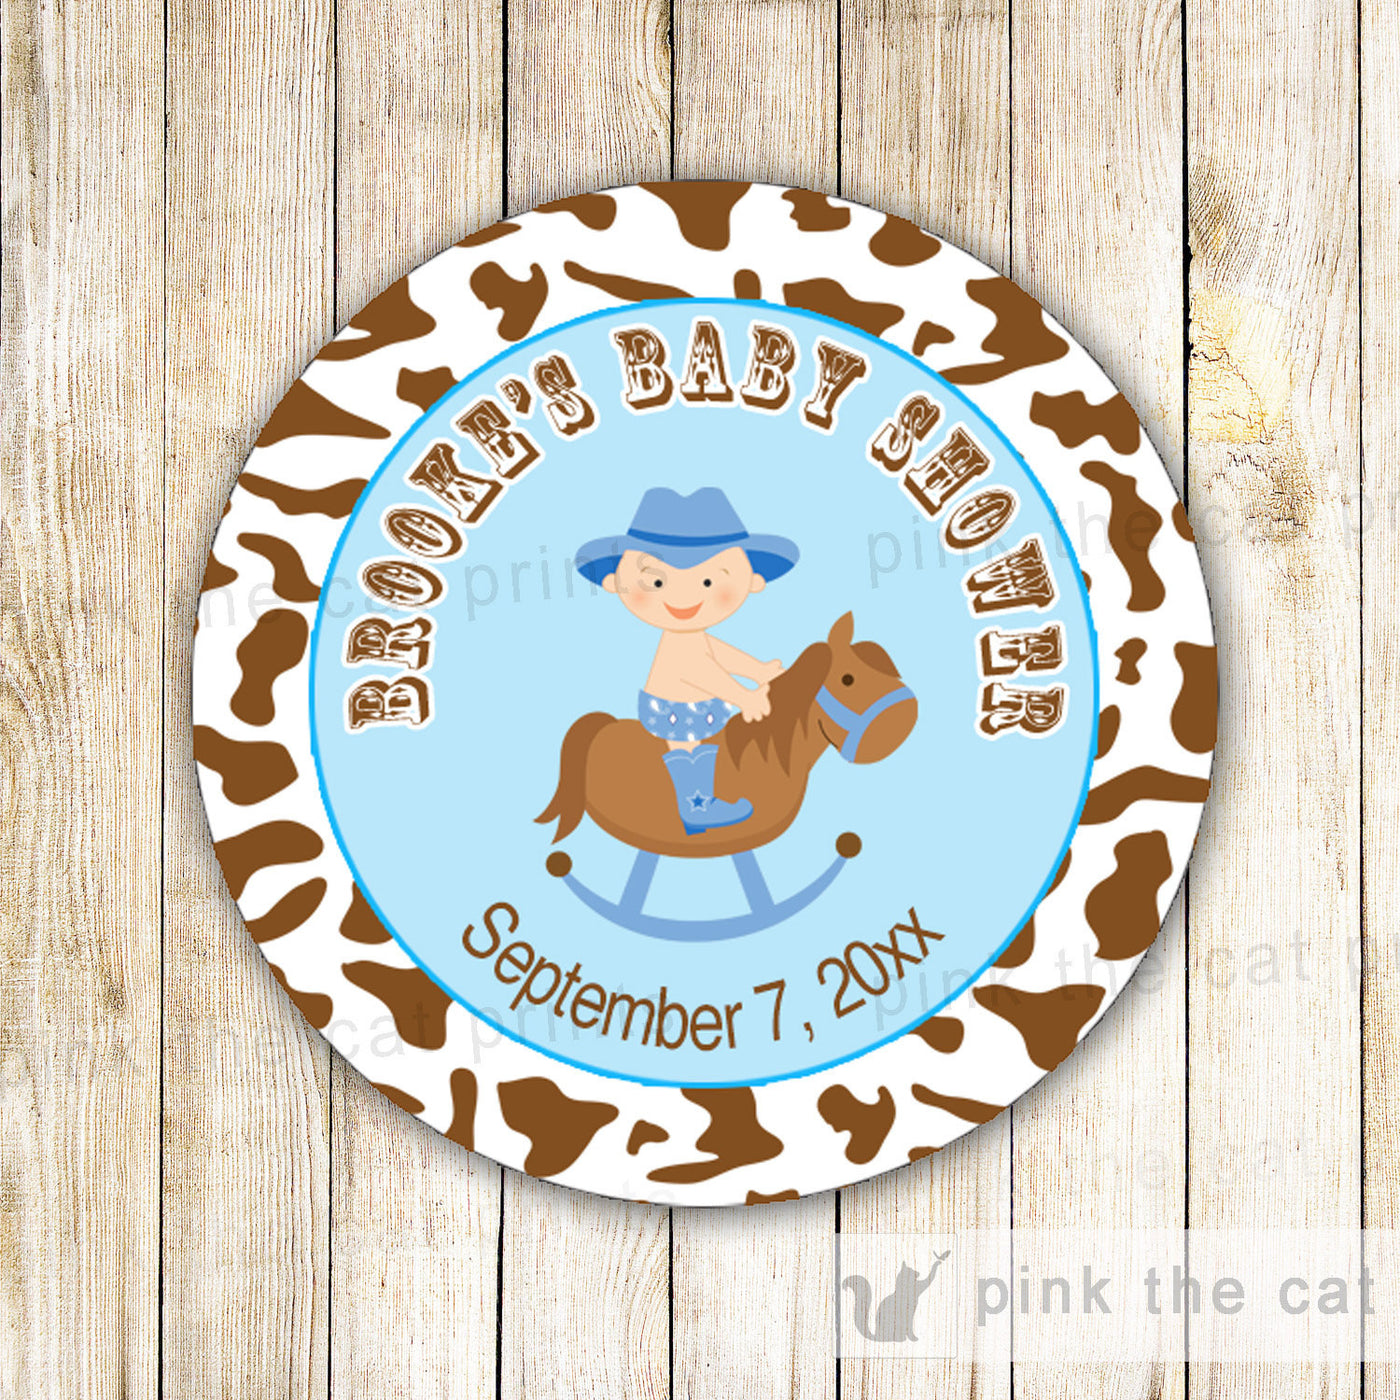 Cowboy Baby Boy Shower Thank You Tag Label Sticker Pink The Cat